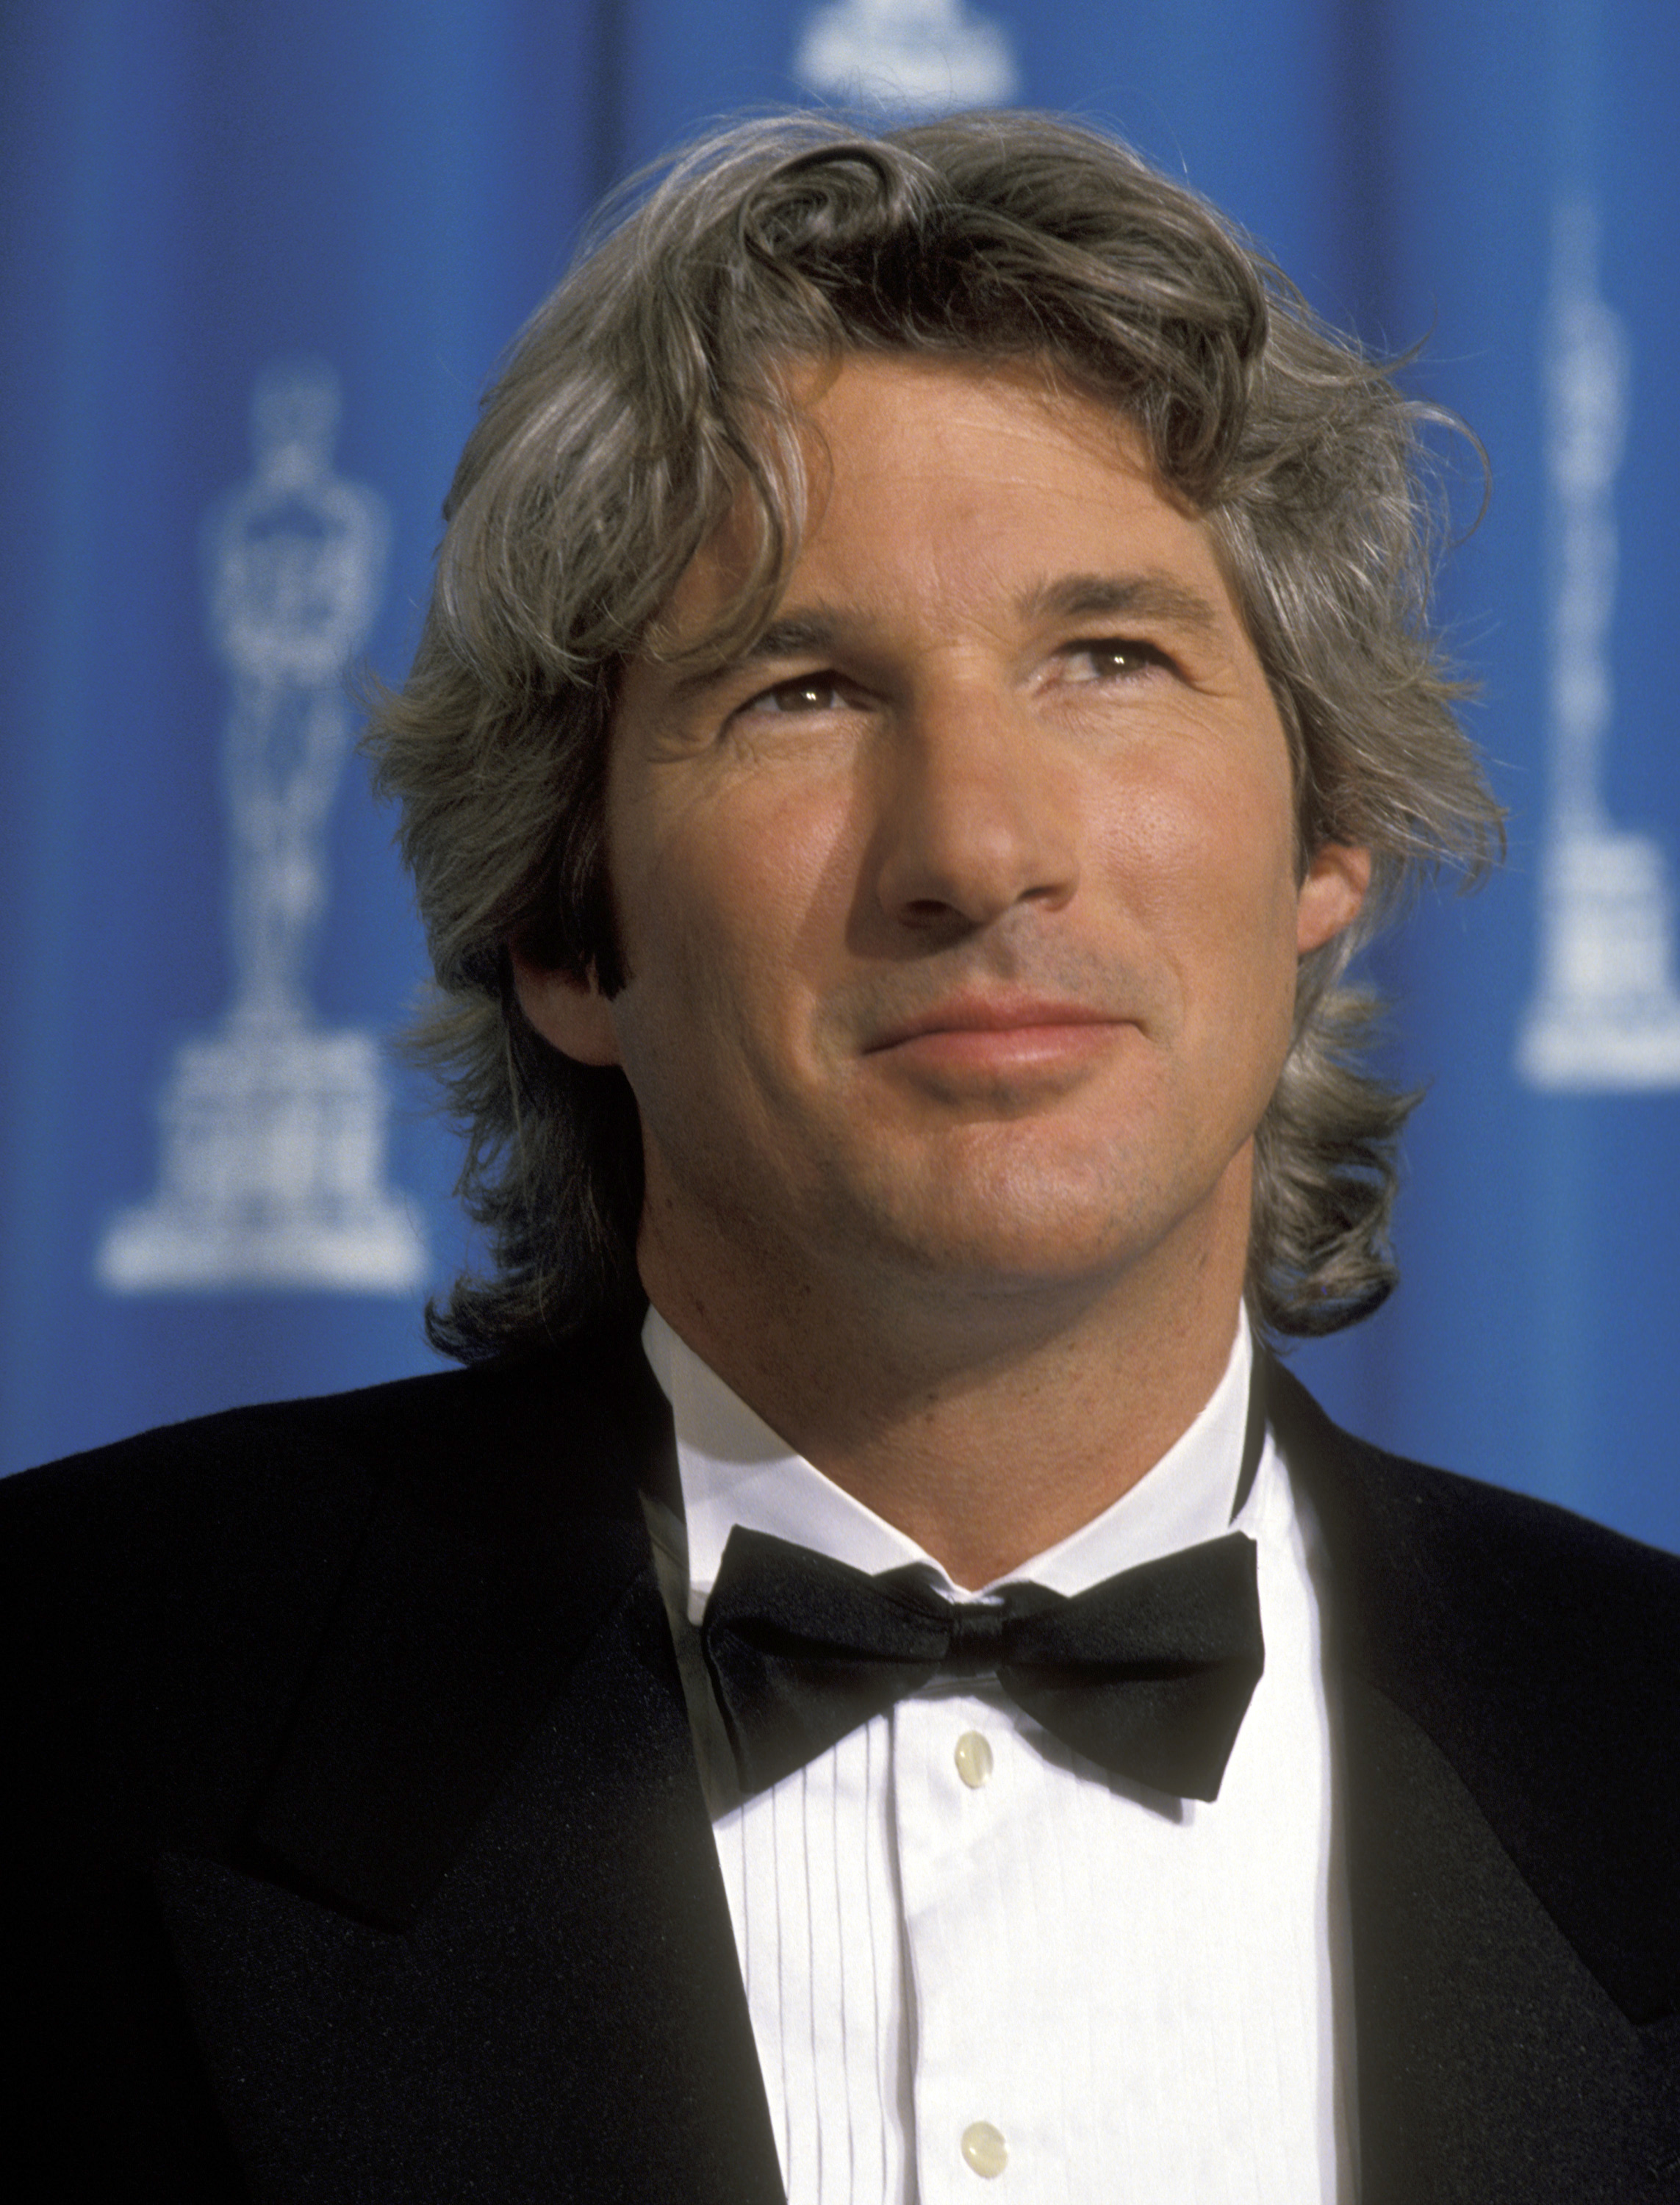 Richard Gere during 65th Annual Academy Awards at Shrine Auditorium on March 29, 1993 in Los Angeles, California. | Source: Getty Images